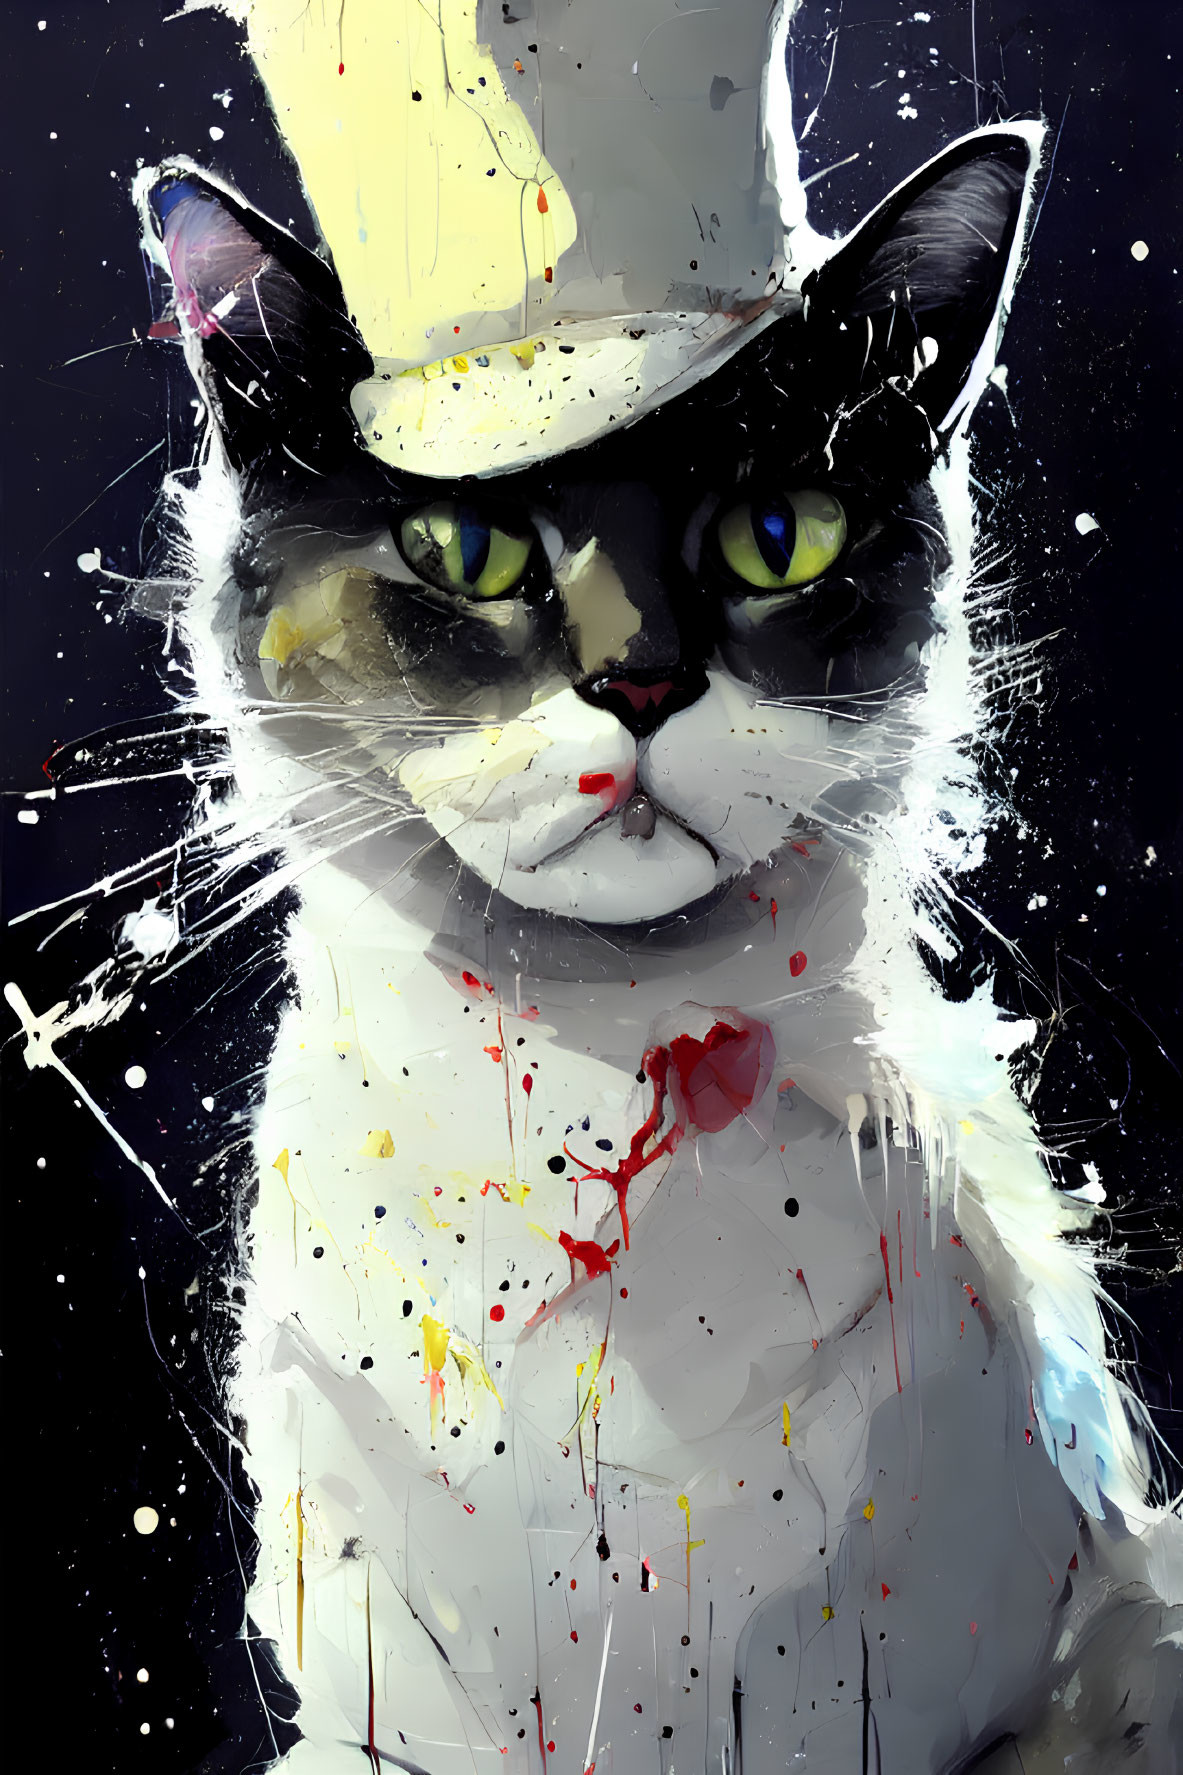 Digital painting of a cat with yellow eyes and hat in colorful splatter.